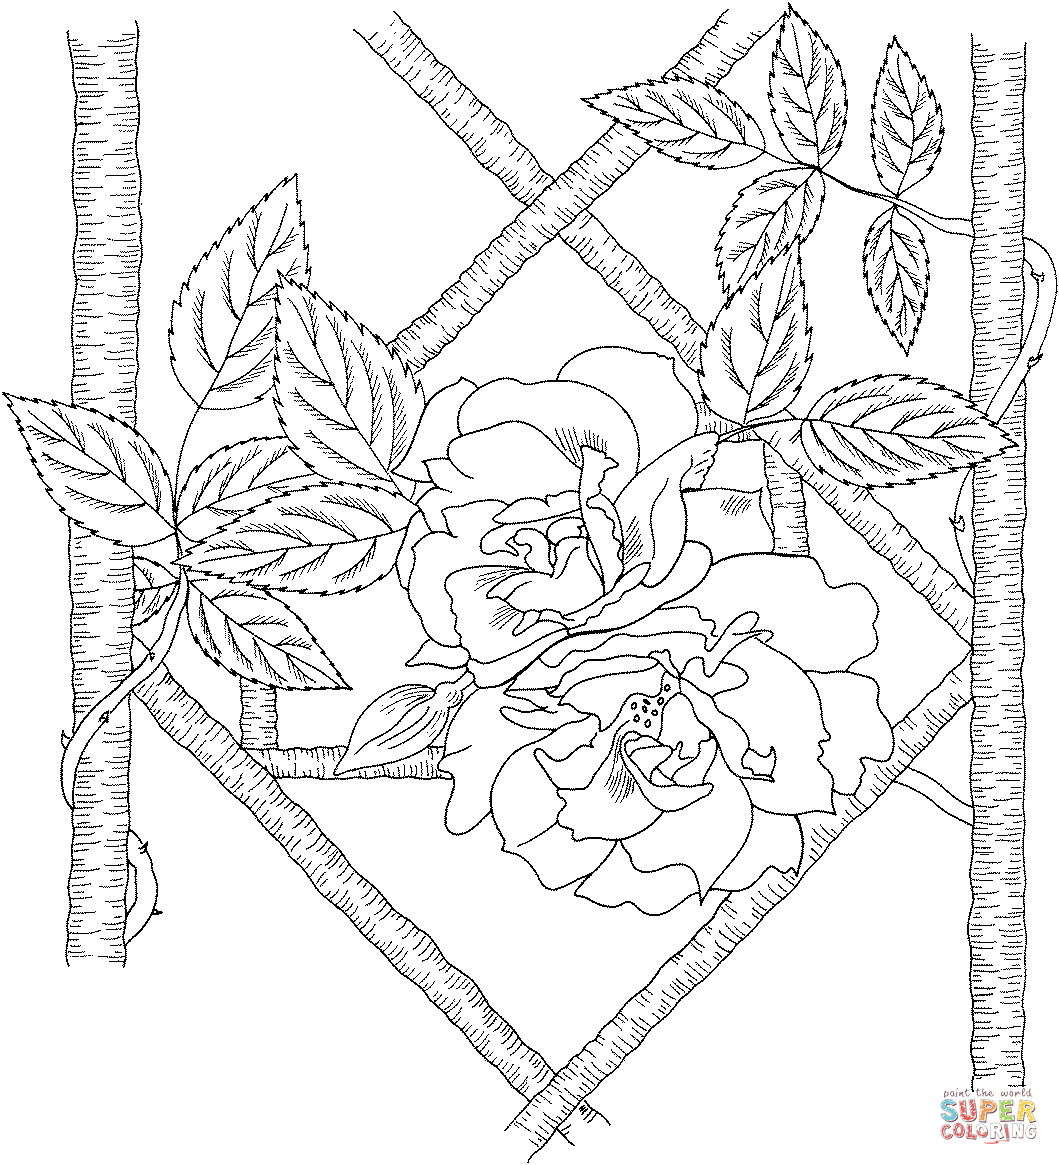 Climbing Blaze Rose Coloring Pages